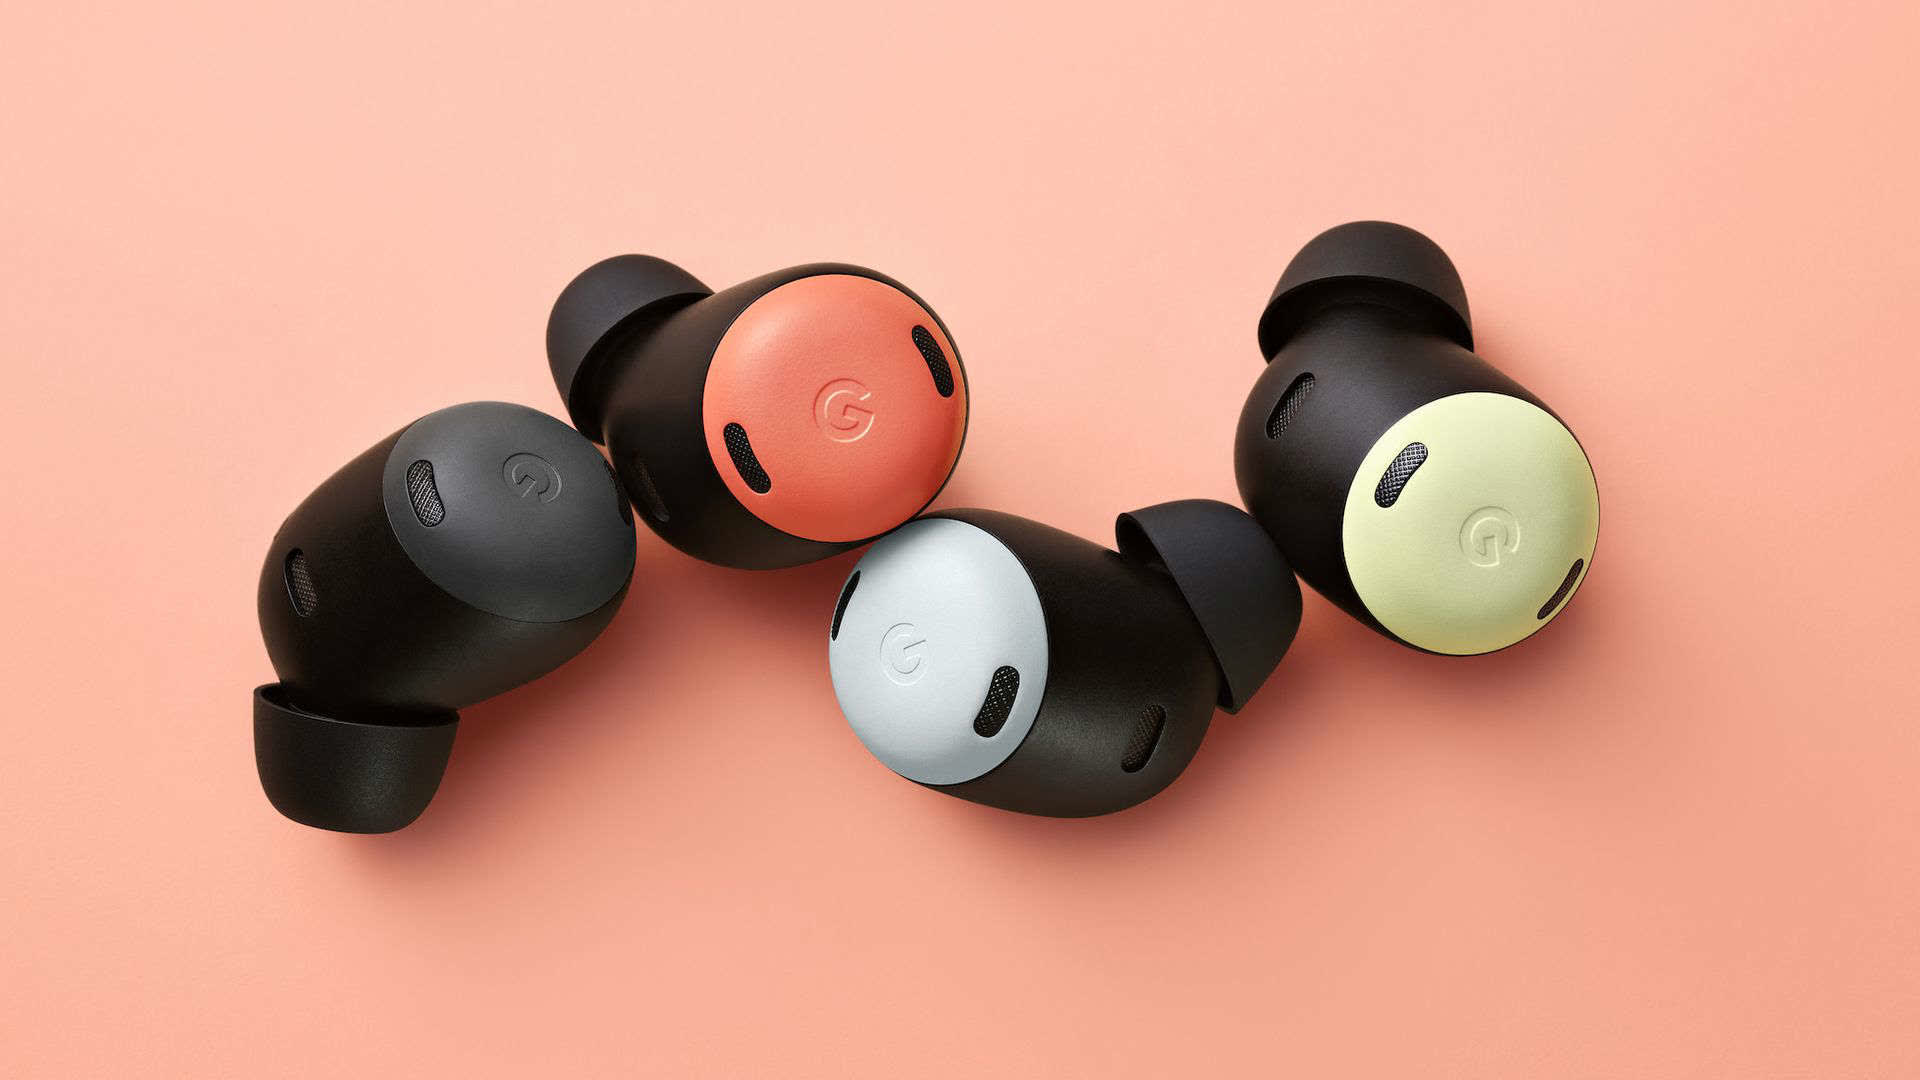 The Pixel Buds Pro are Google's first wireless earbuds to feature active noise cancellation